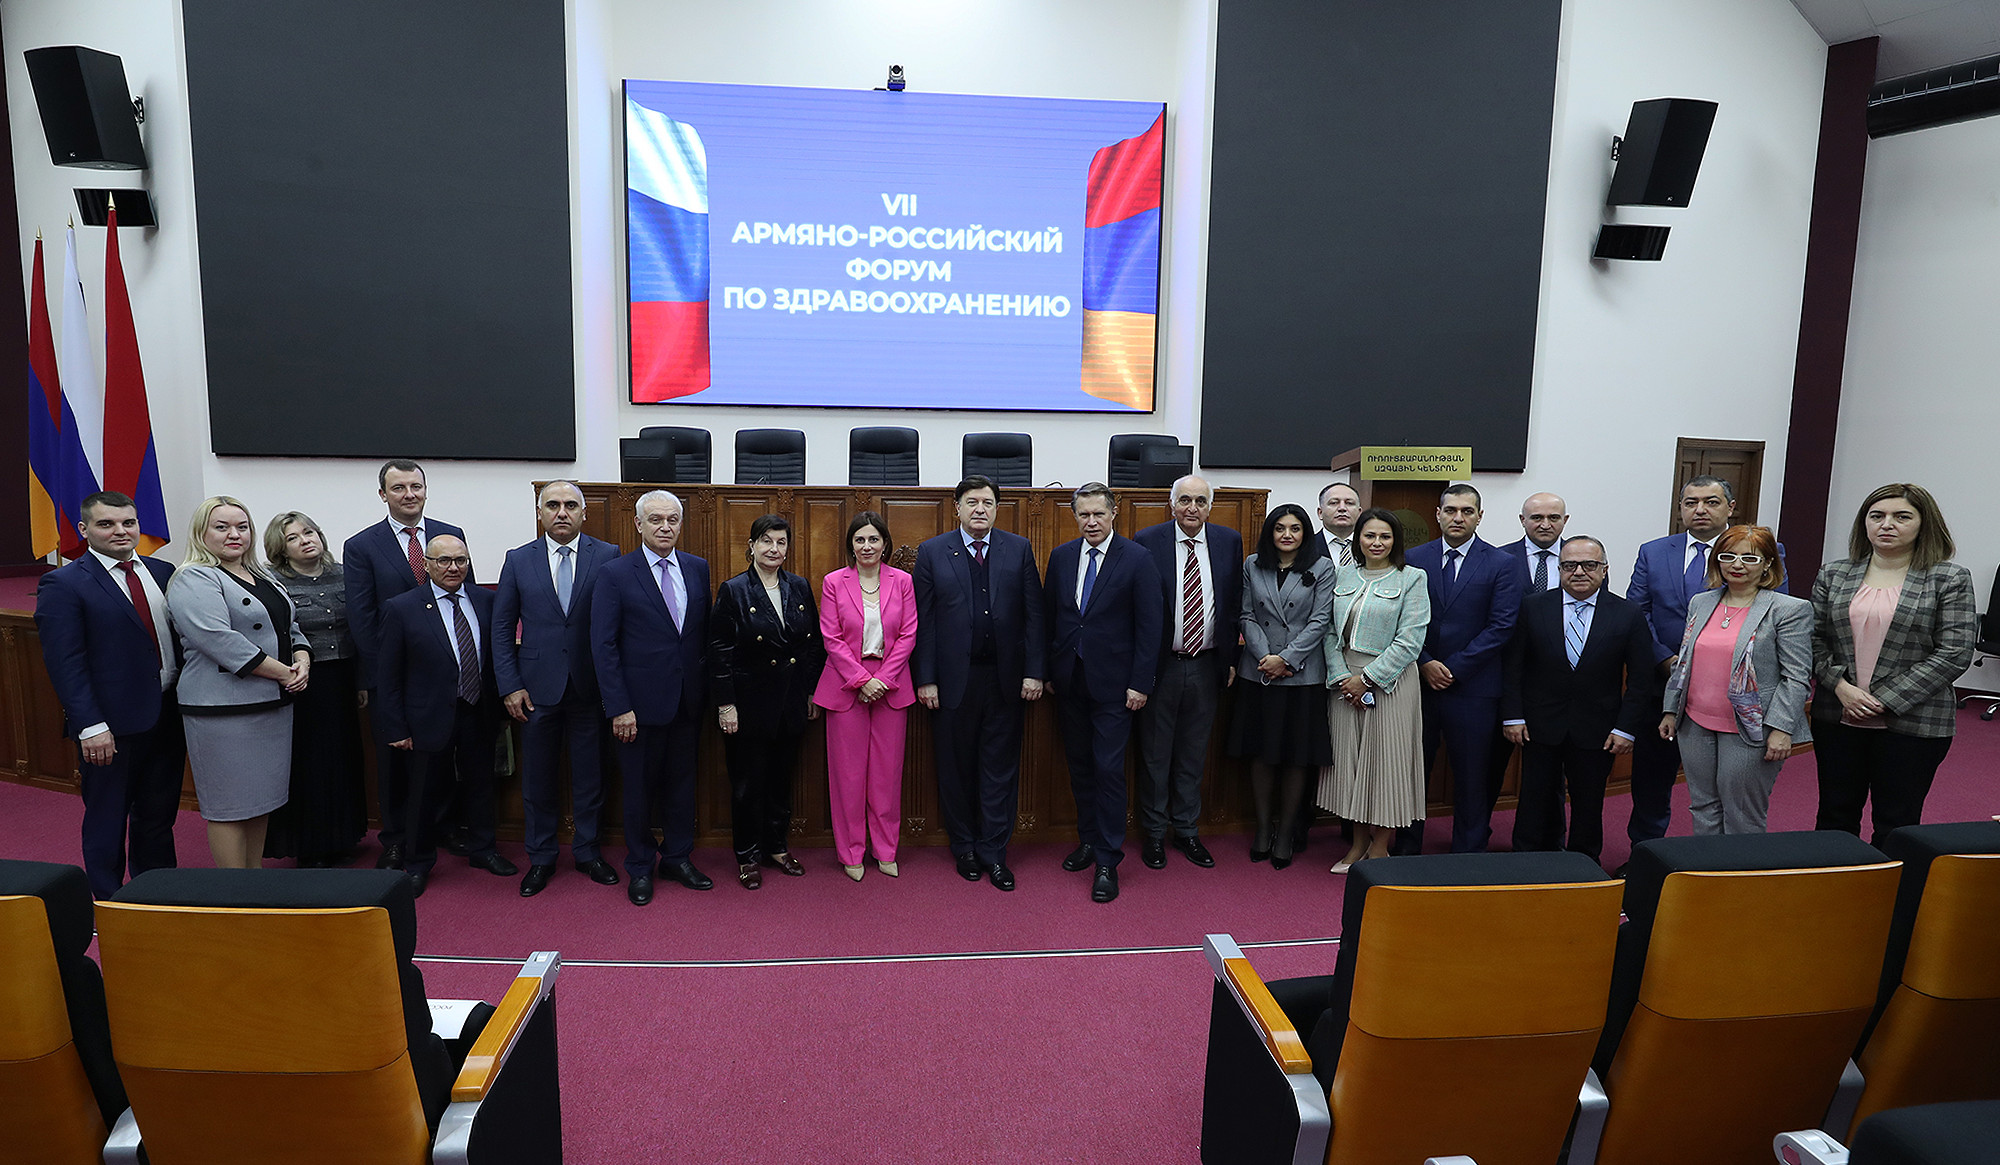 Delegation led by Minister of Health of Russia participated in 7th Armenian-Russian health forum